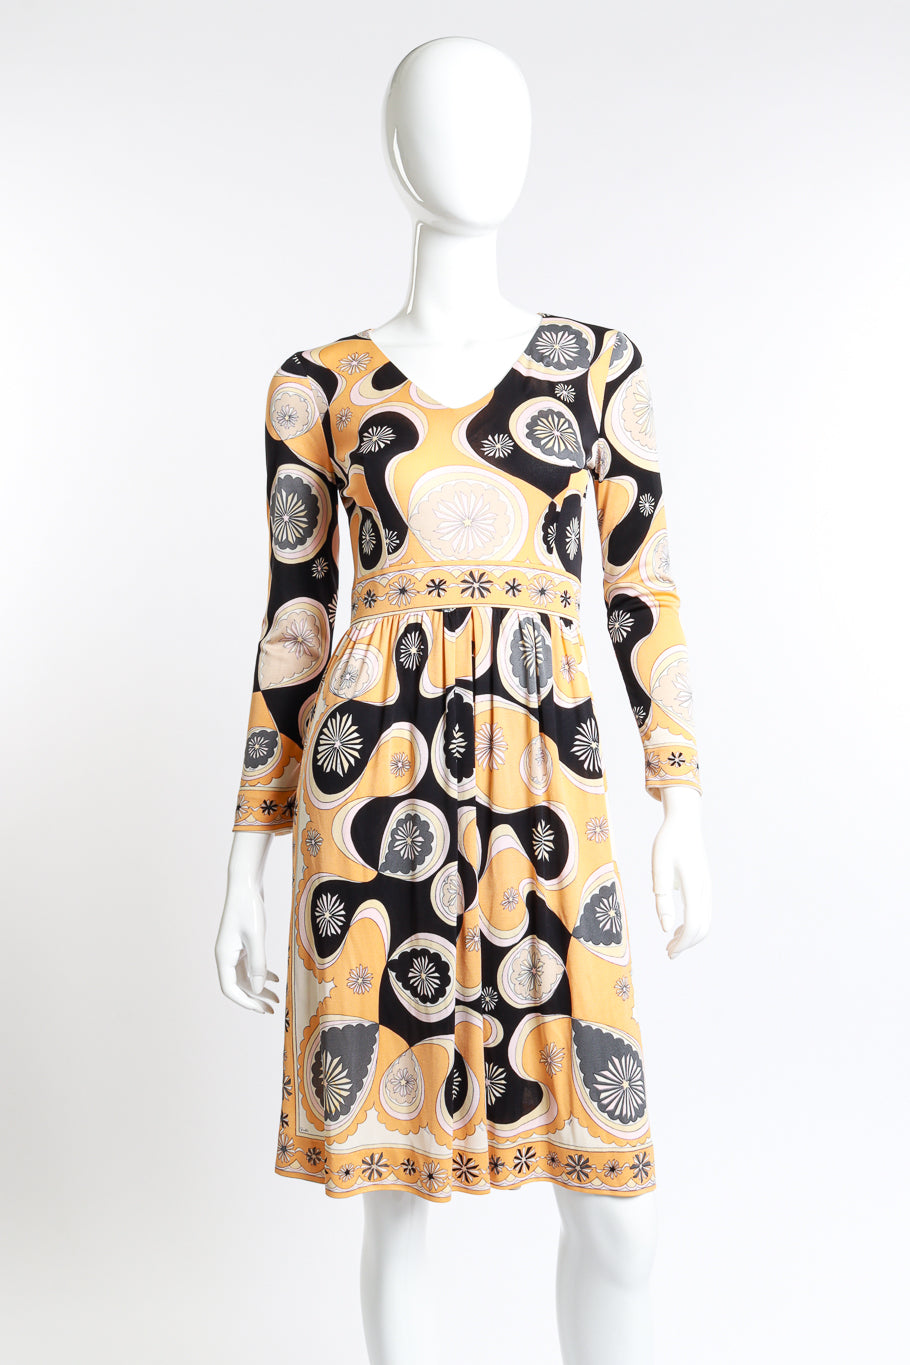 Geo Floral Print Dress by Pucci on mannequin @RECESS LA